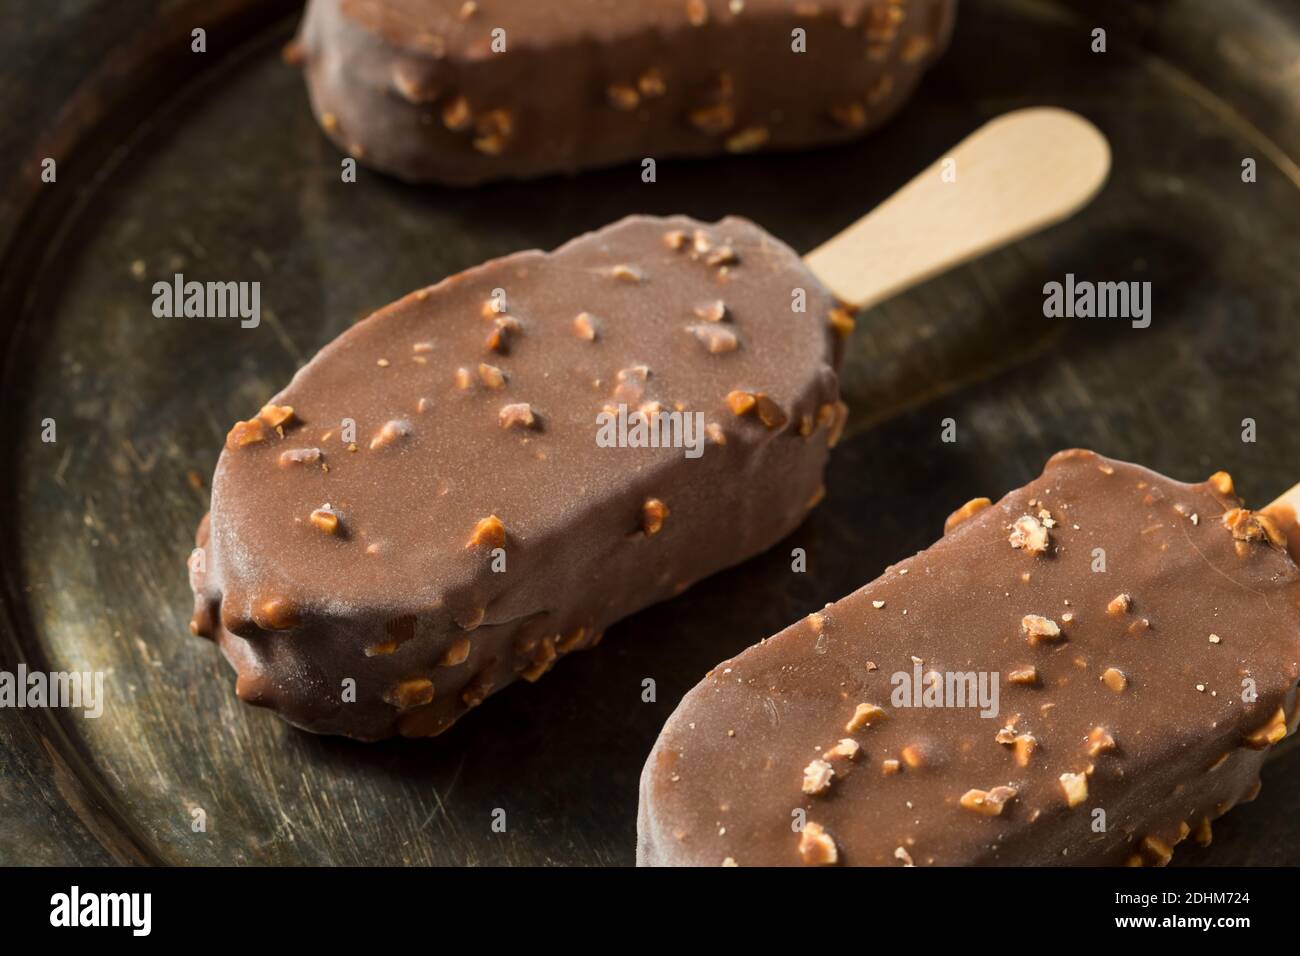 Frozen Chocolate Covered Ice Cream Bars with Nuts Stock Photo